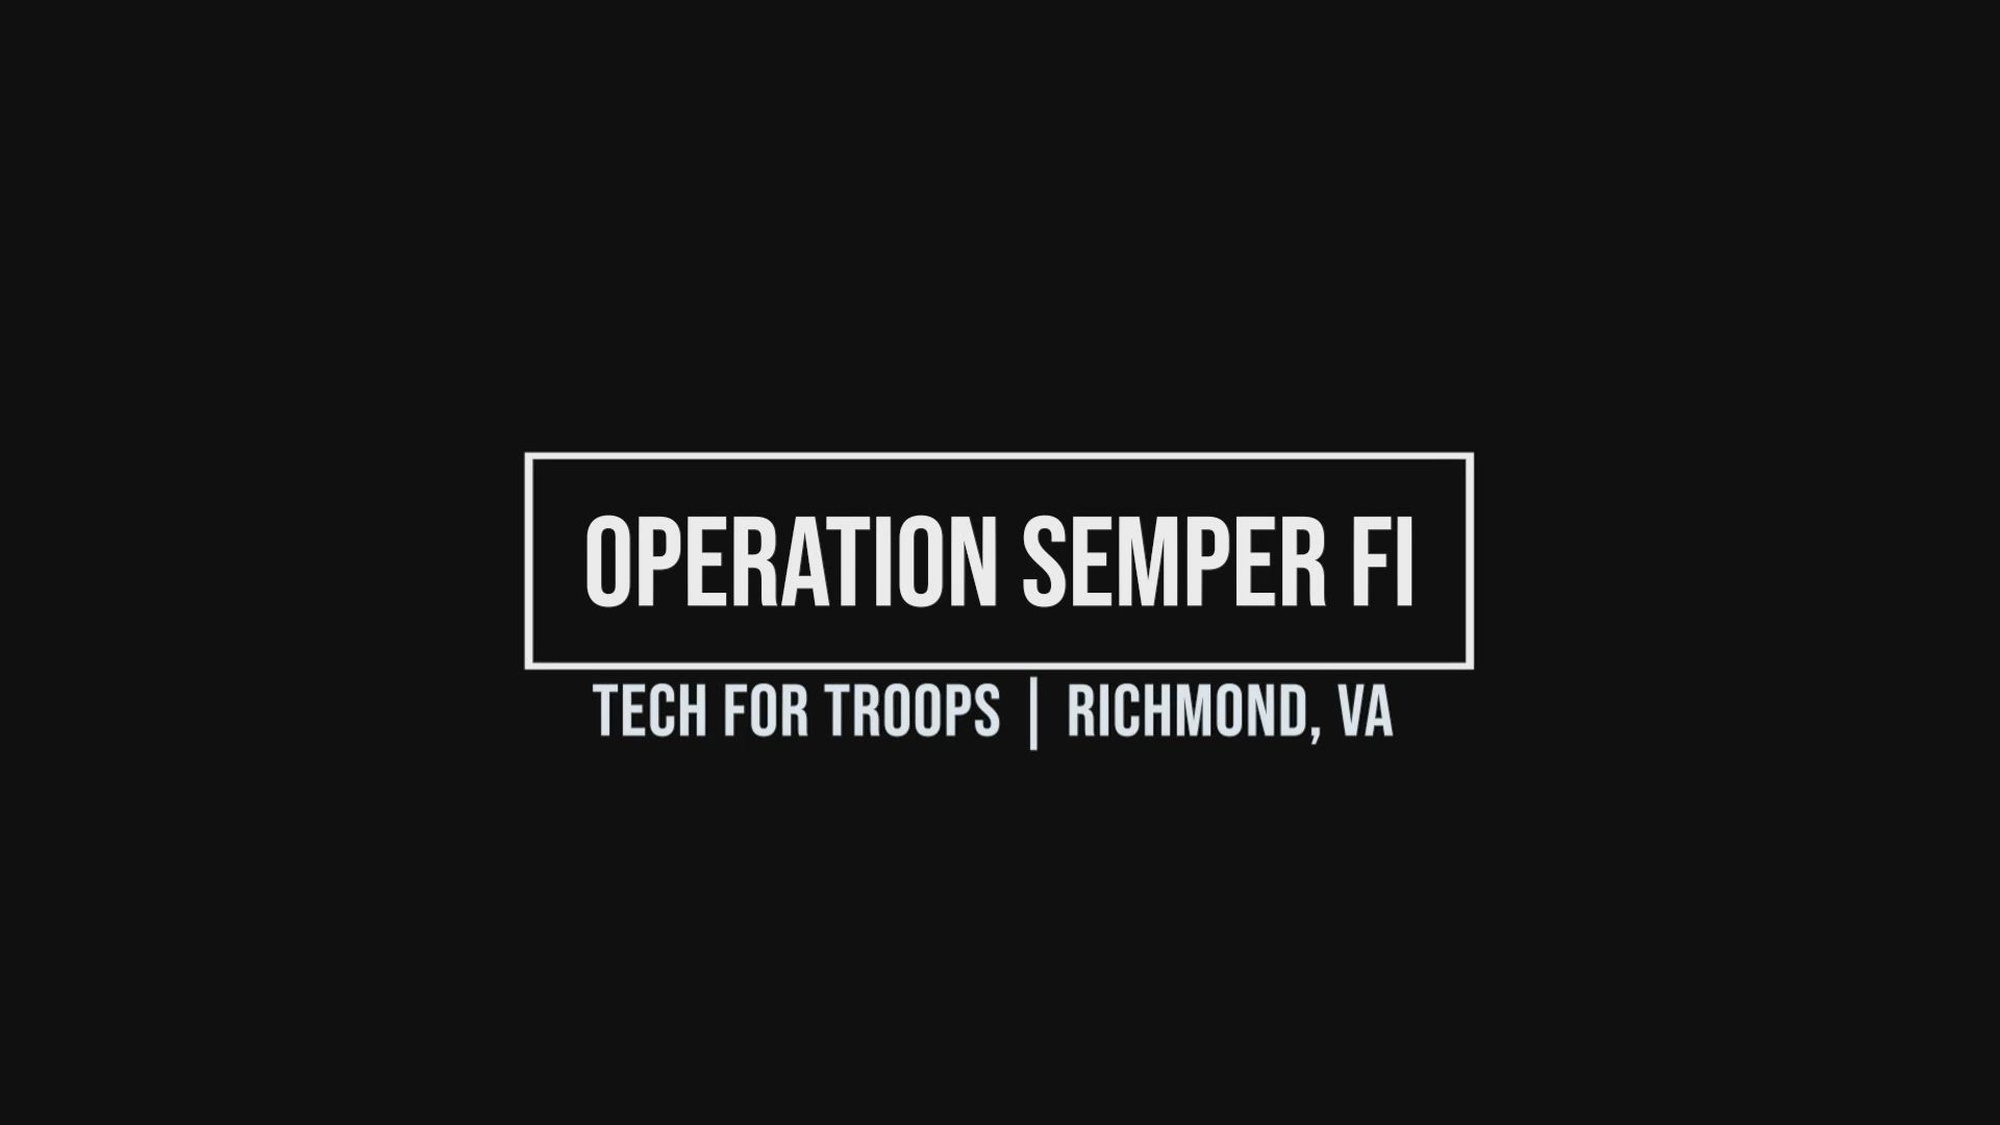 U.S. Marine Corps veteran Mark Casper, President of Tech for Troops, continues his service to the community by refurbishing electronic items and providing them to veterans. Operation Semper Fi reconnects Marine veterans and builds on the pride they have for the Marine Corps. (U.S. Marine Corps video by Sgt. Alexa M. Hernandez)